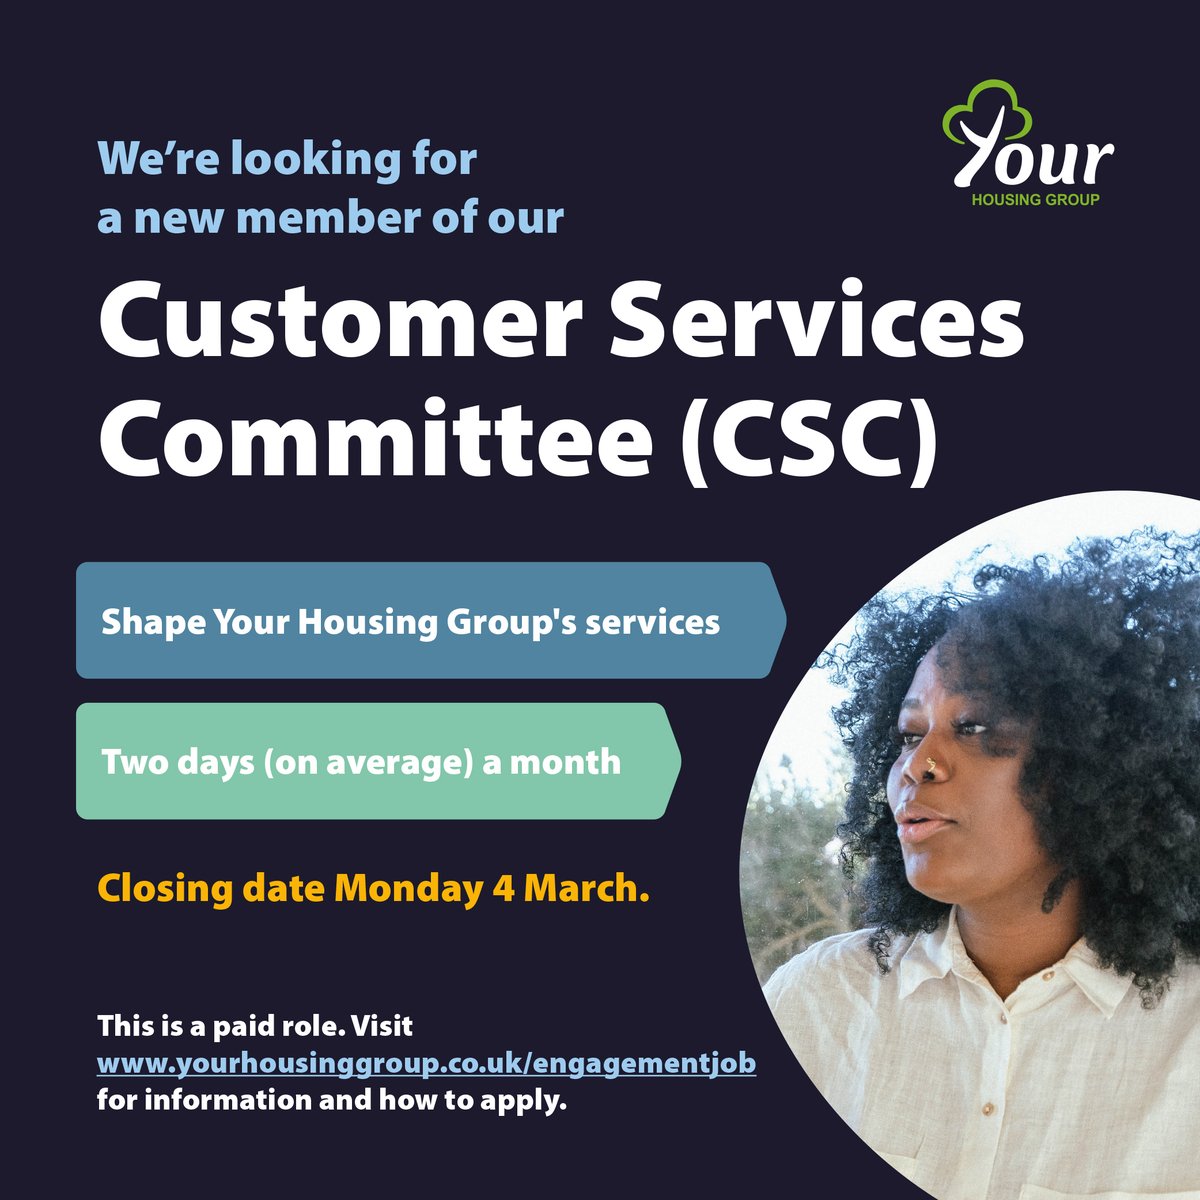 🚨 One week left! 🧍 If you're a Your Housing Group resident, you'd like to shape the services you receive & you have experience in housing - we want to hear from you as we look for a new member of our Customer Services Committee. Find out more & apply ow.ly/1aPX50QwR9S